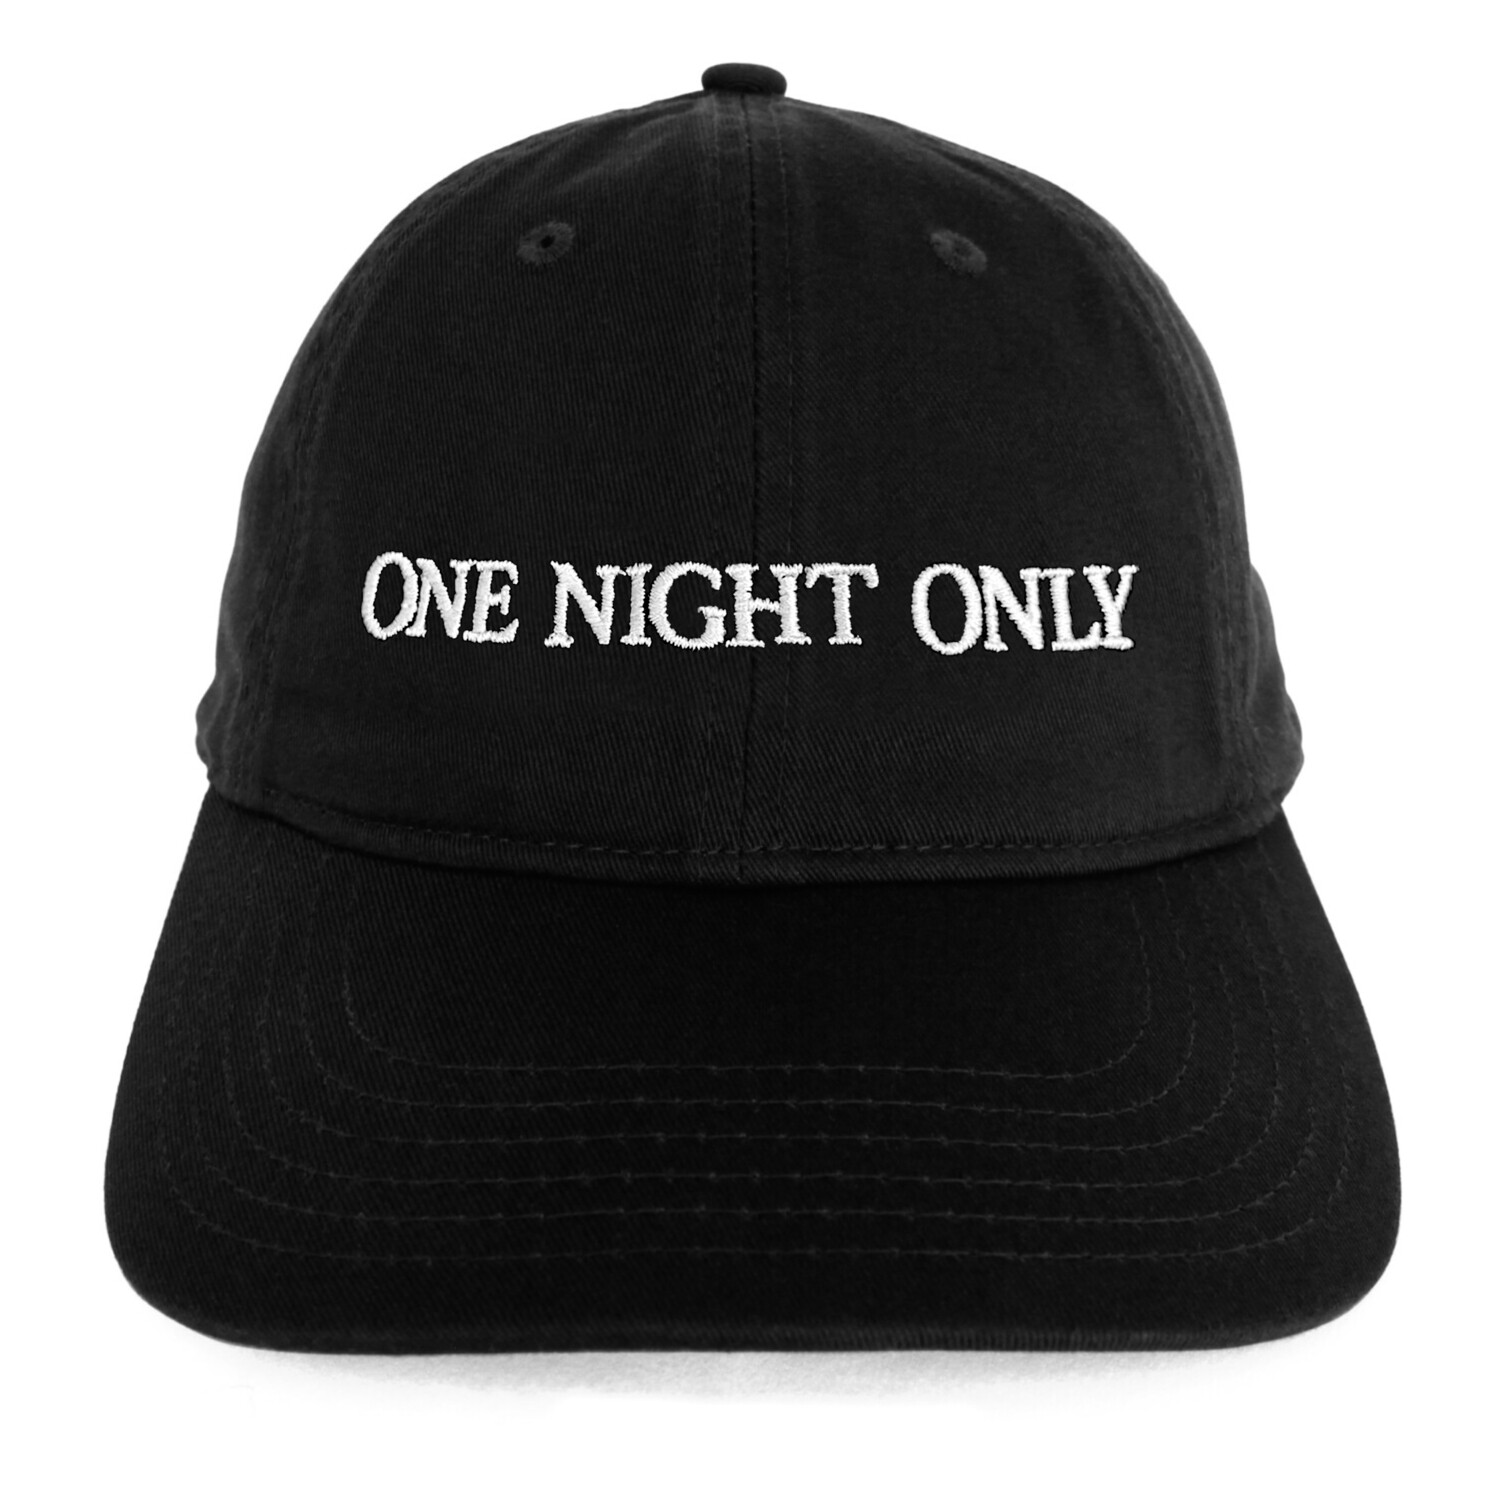 ONE NIGHT ONLY HAT (Black)